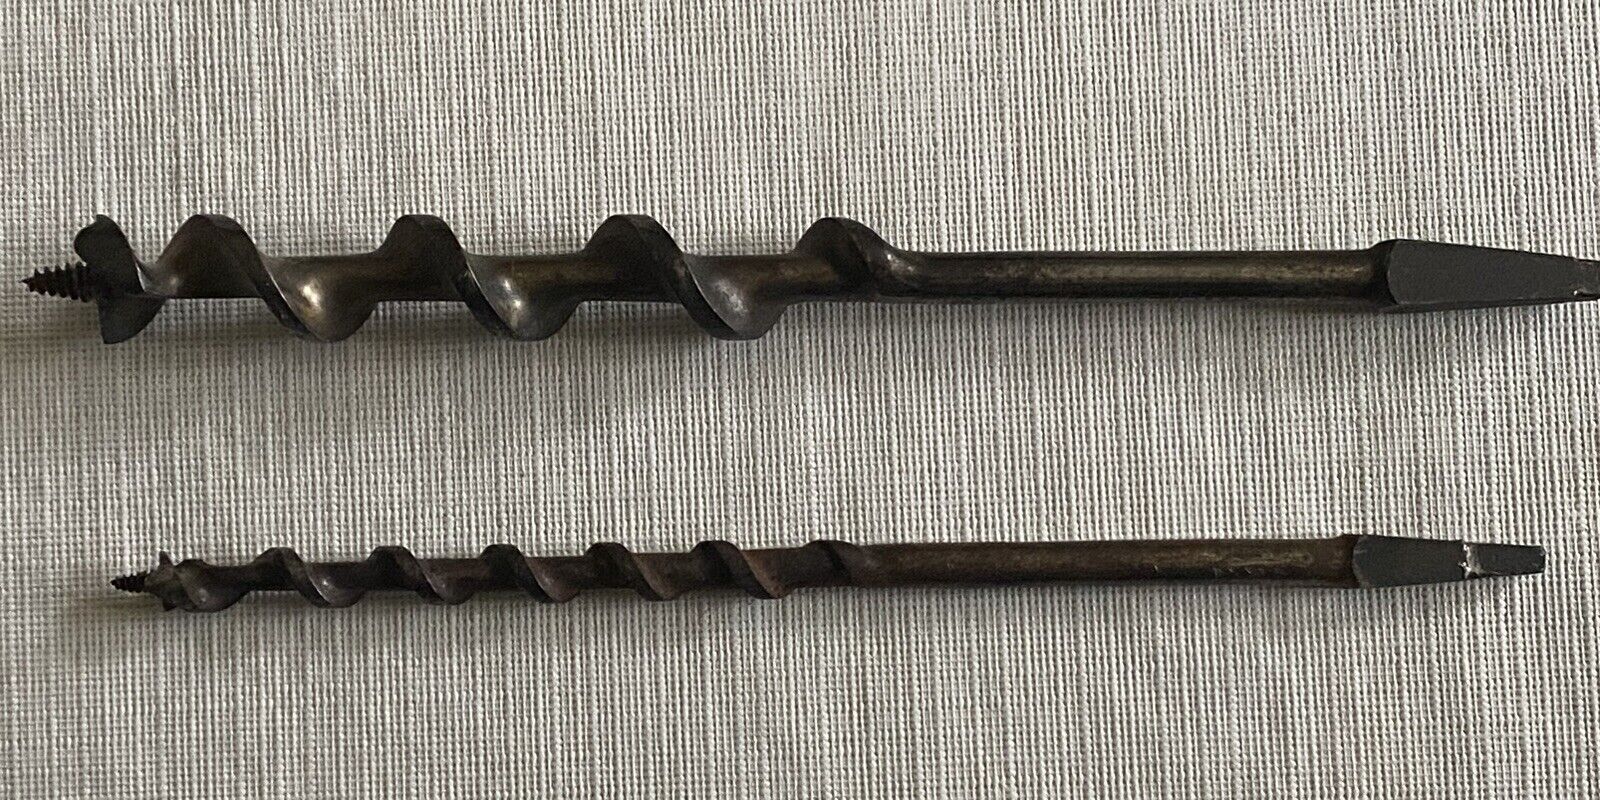 Vintage Irwin #12 And #6 Auger Drill Bits